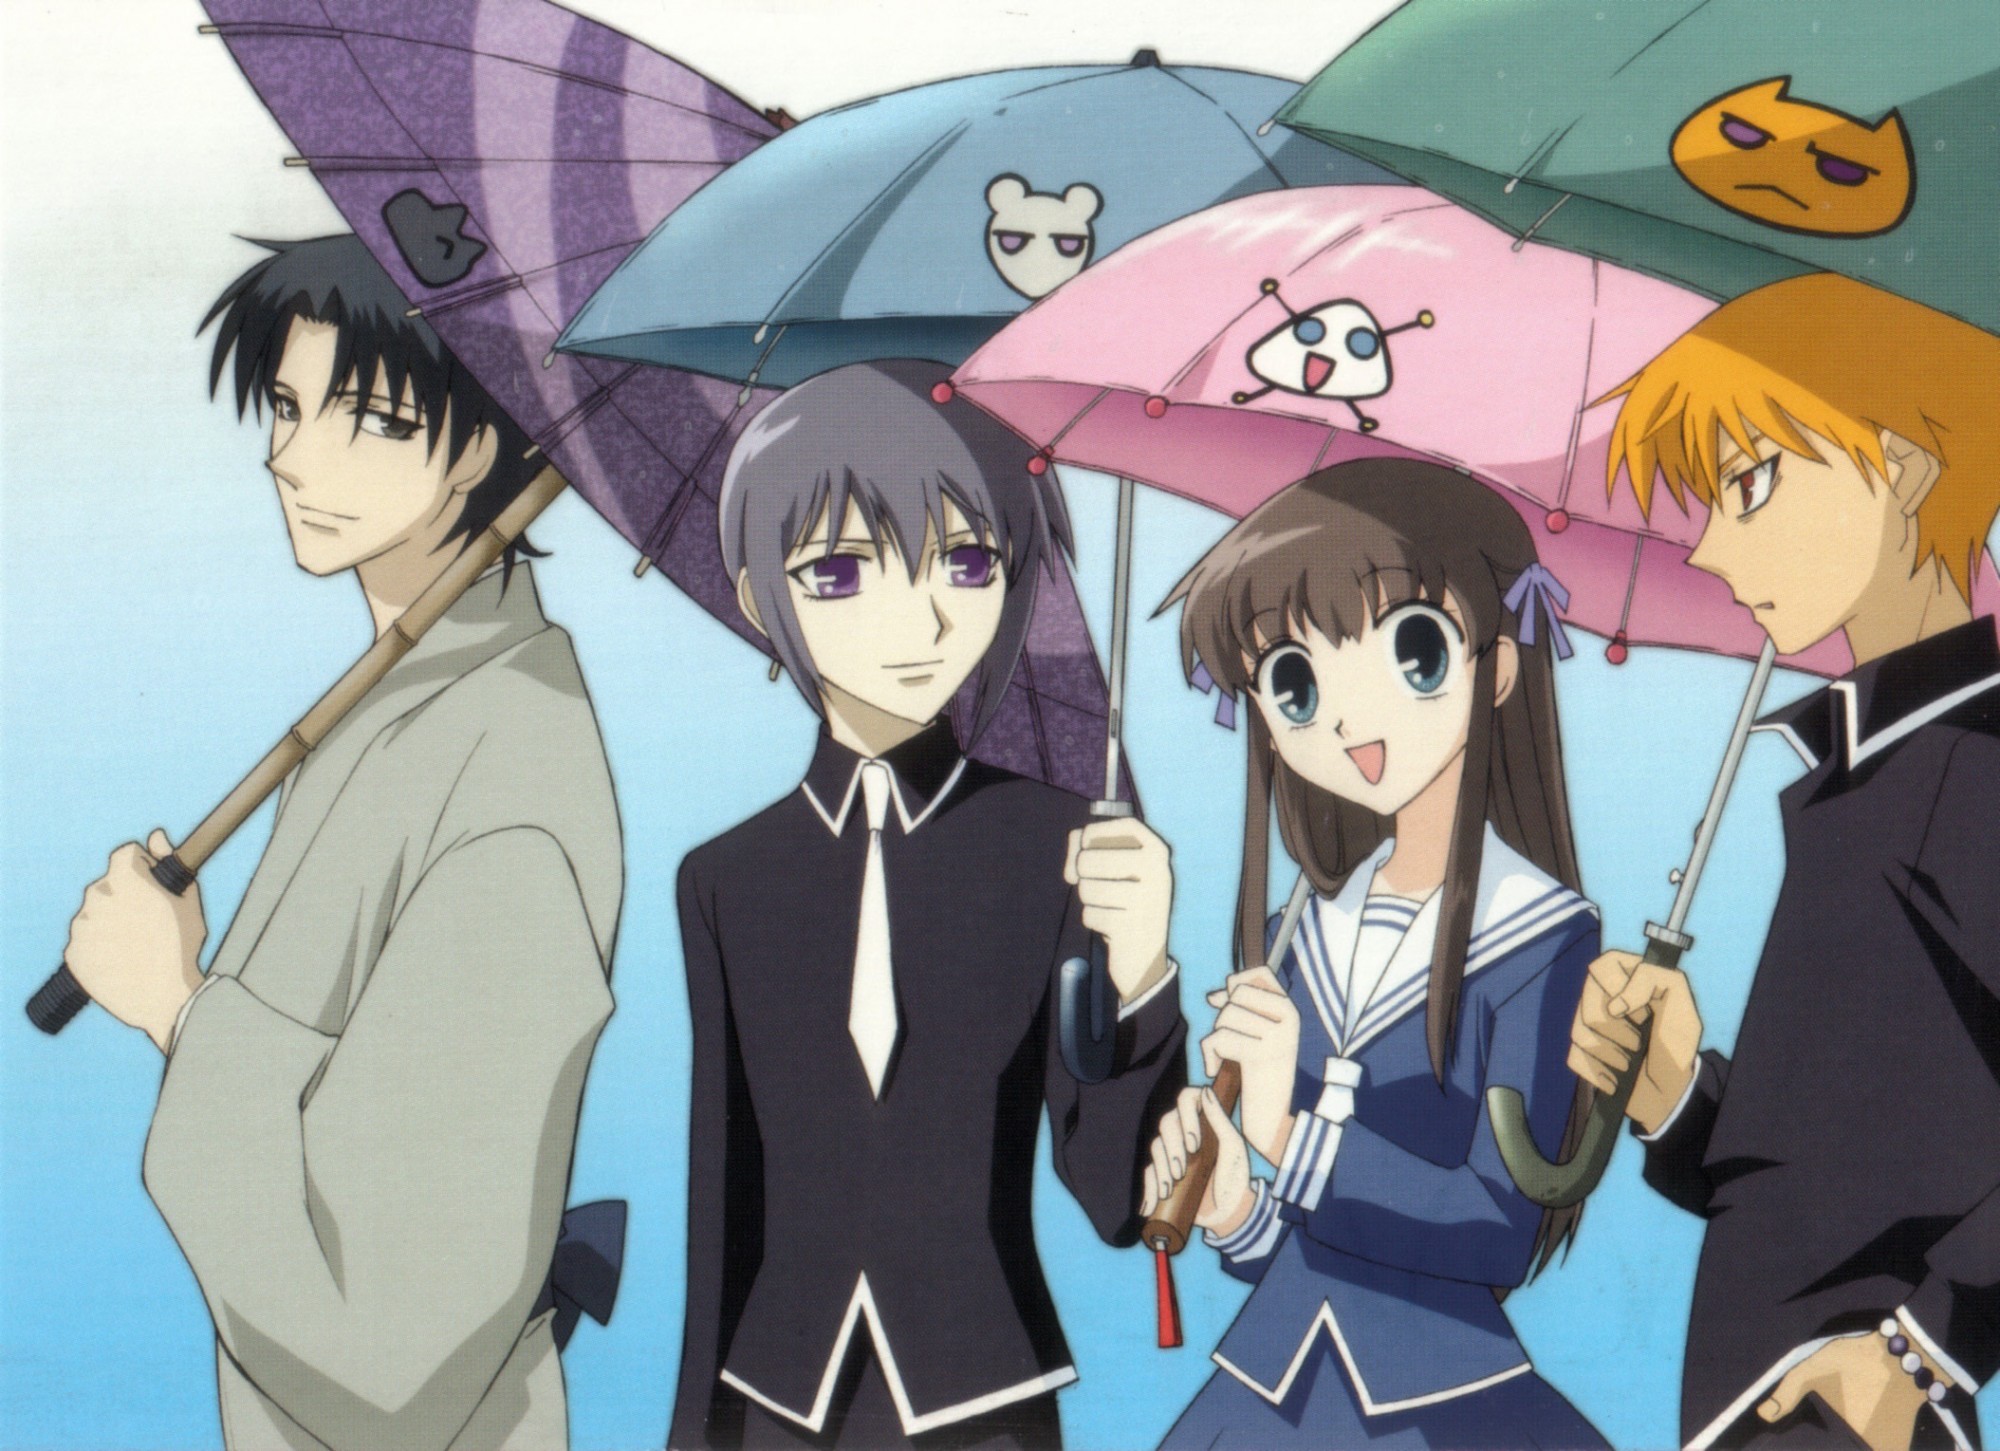 When is Fruits Basket Season 2 Coming Out?